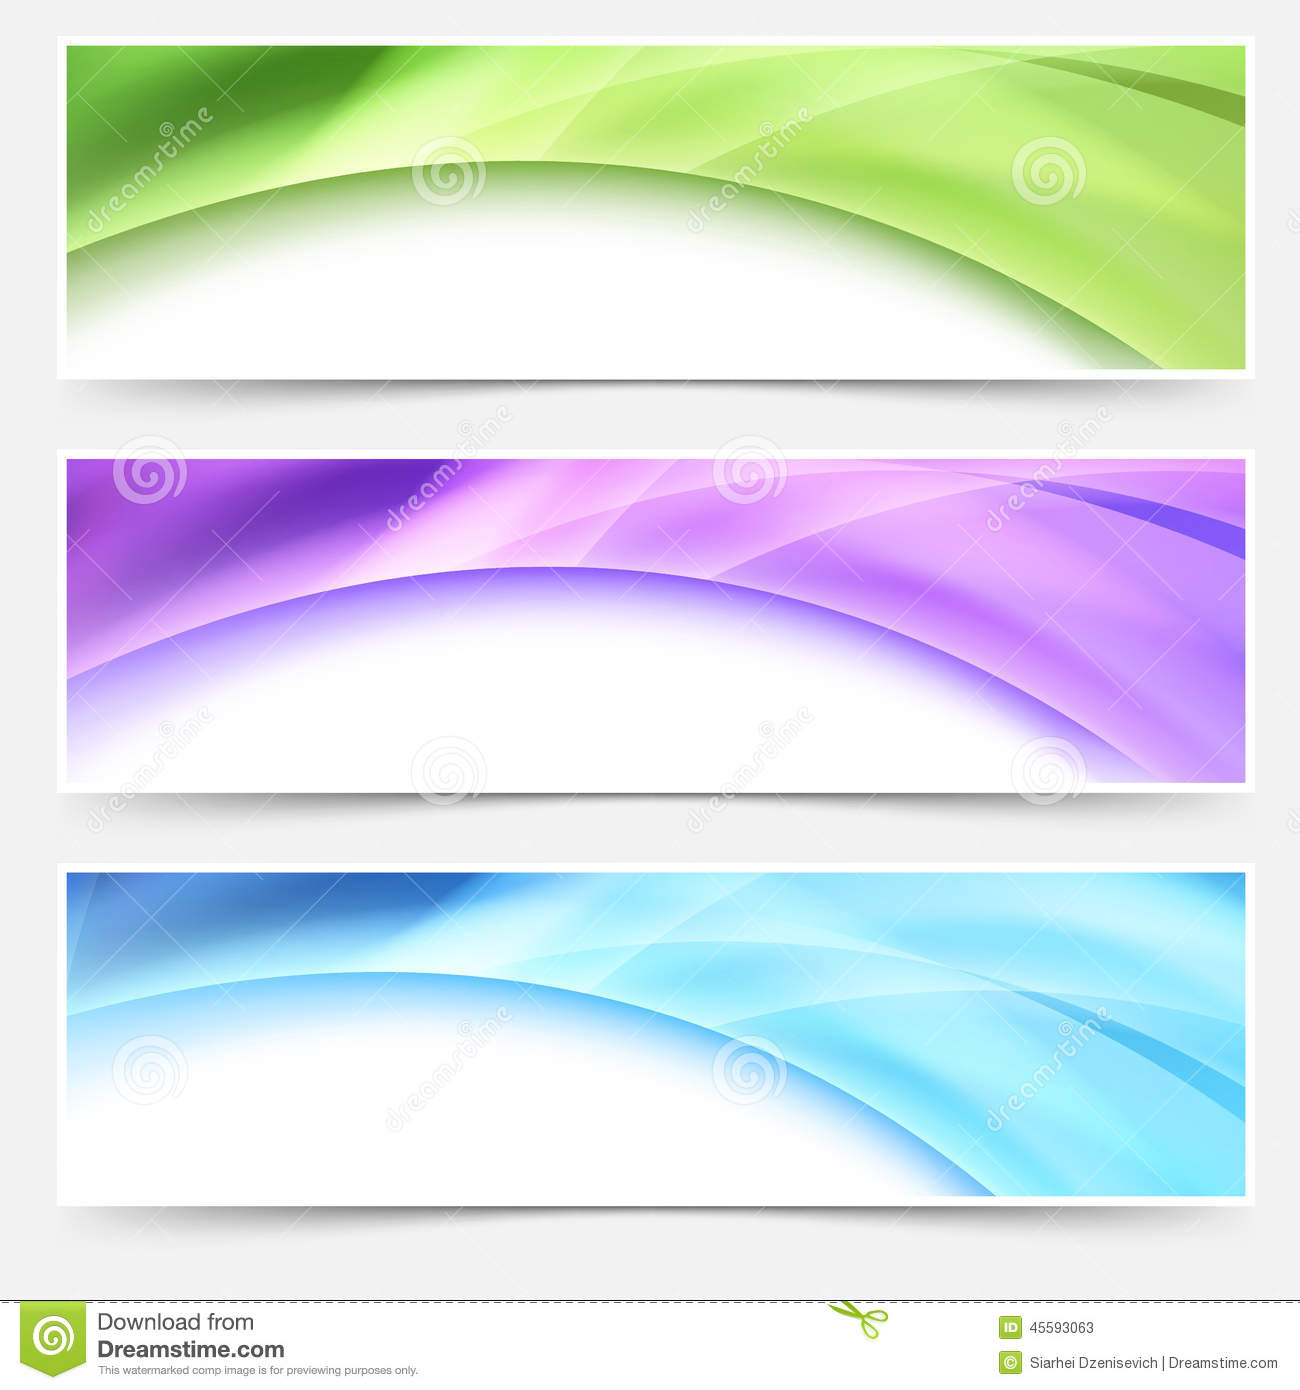 12-page-header-design-images-free-web-page-header-templates-web-page